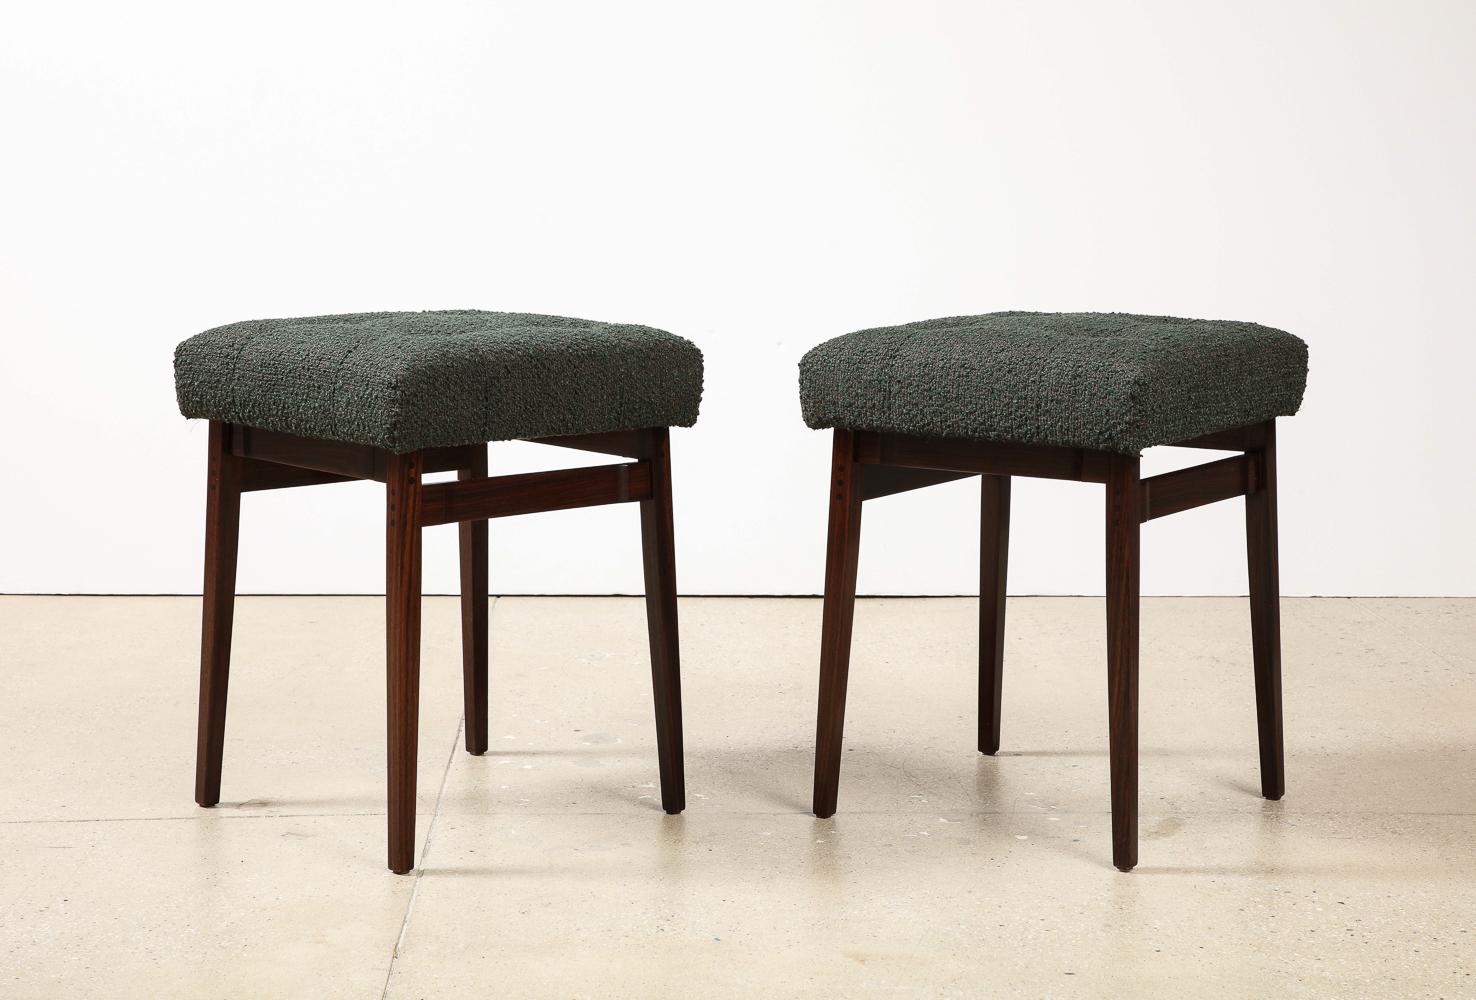 Hand-Crafted Gianfranco Frattini Stools For Sale